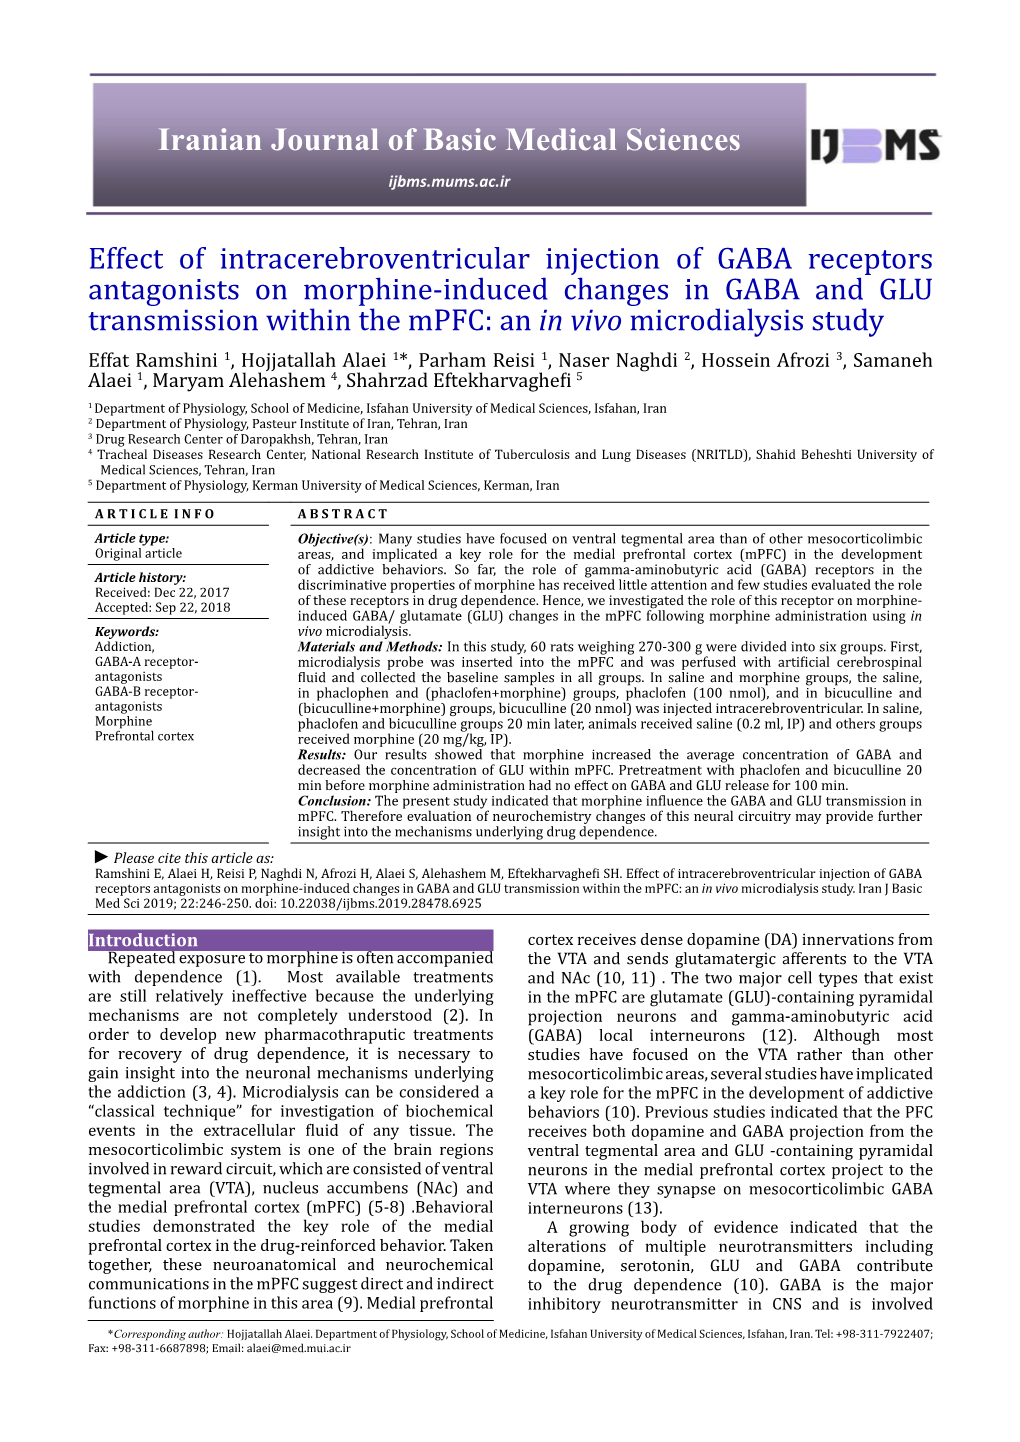 Effect of Intracerebroventricular Injection of GABA Receptors